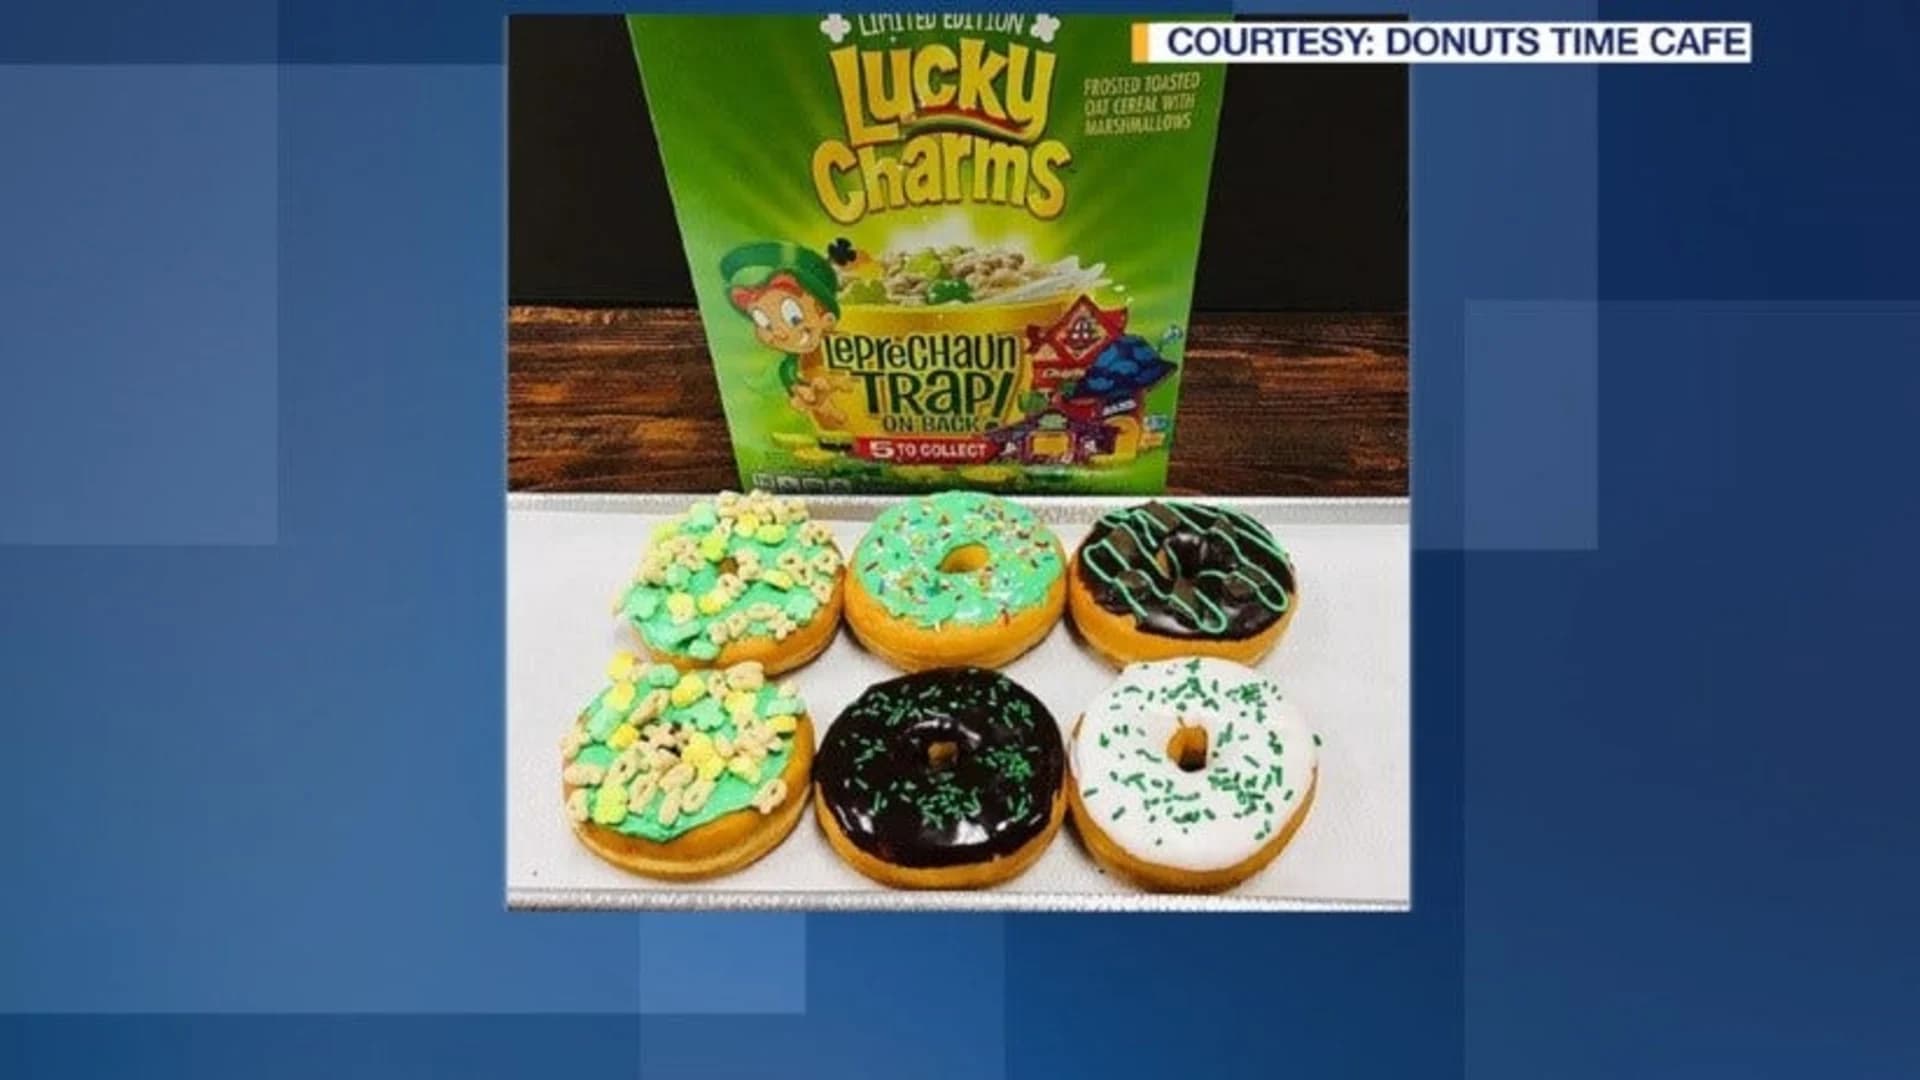 Feeling the luck of the Irish? – Special Lucky Charms doughnuts coming to NJ shop